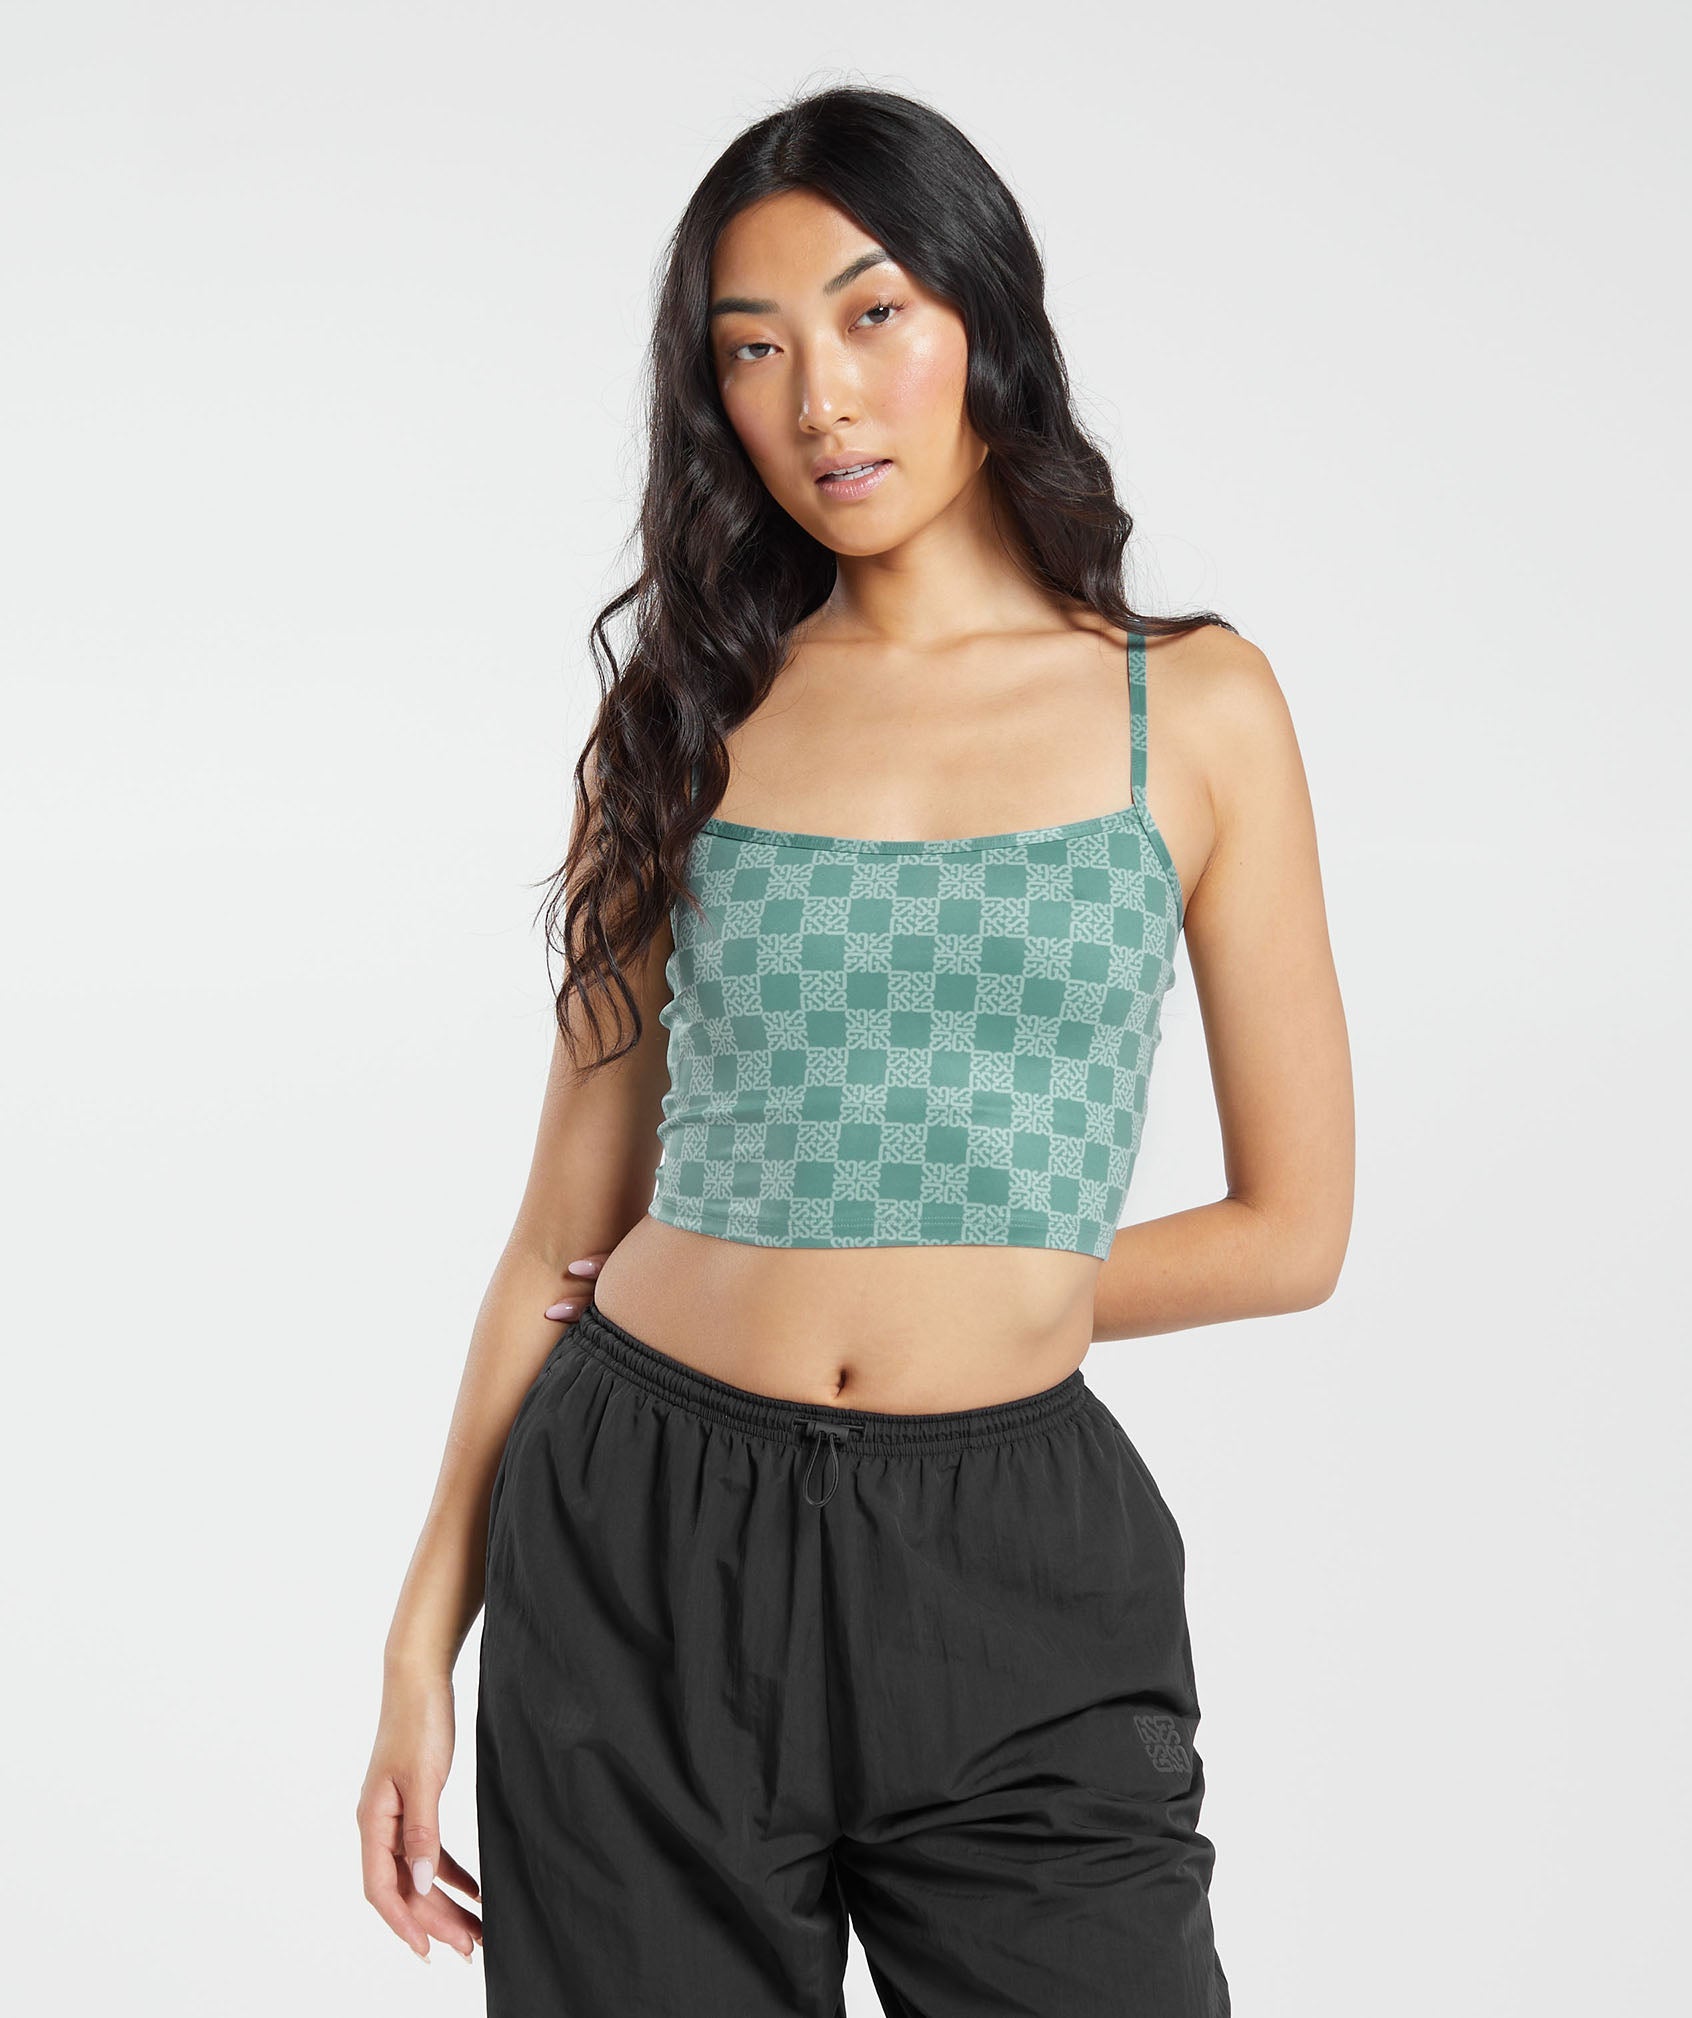 Monogram Crop Cami Tank in Frost Teal - view 1